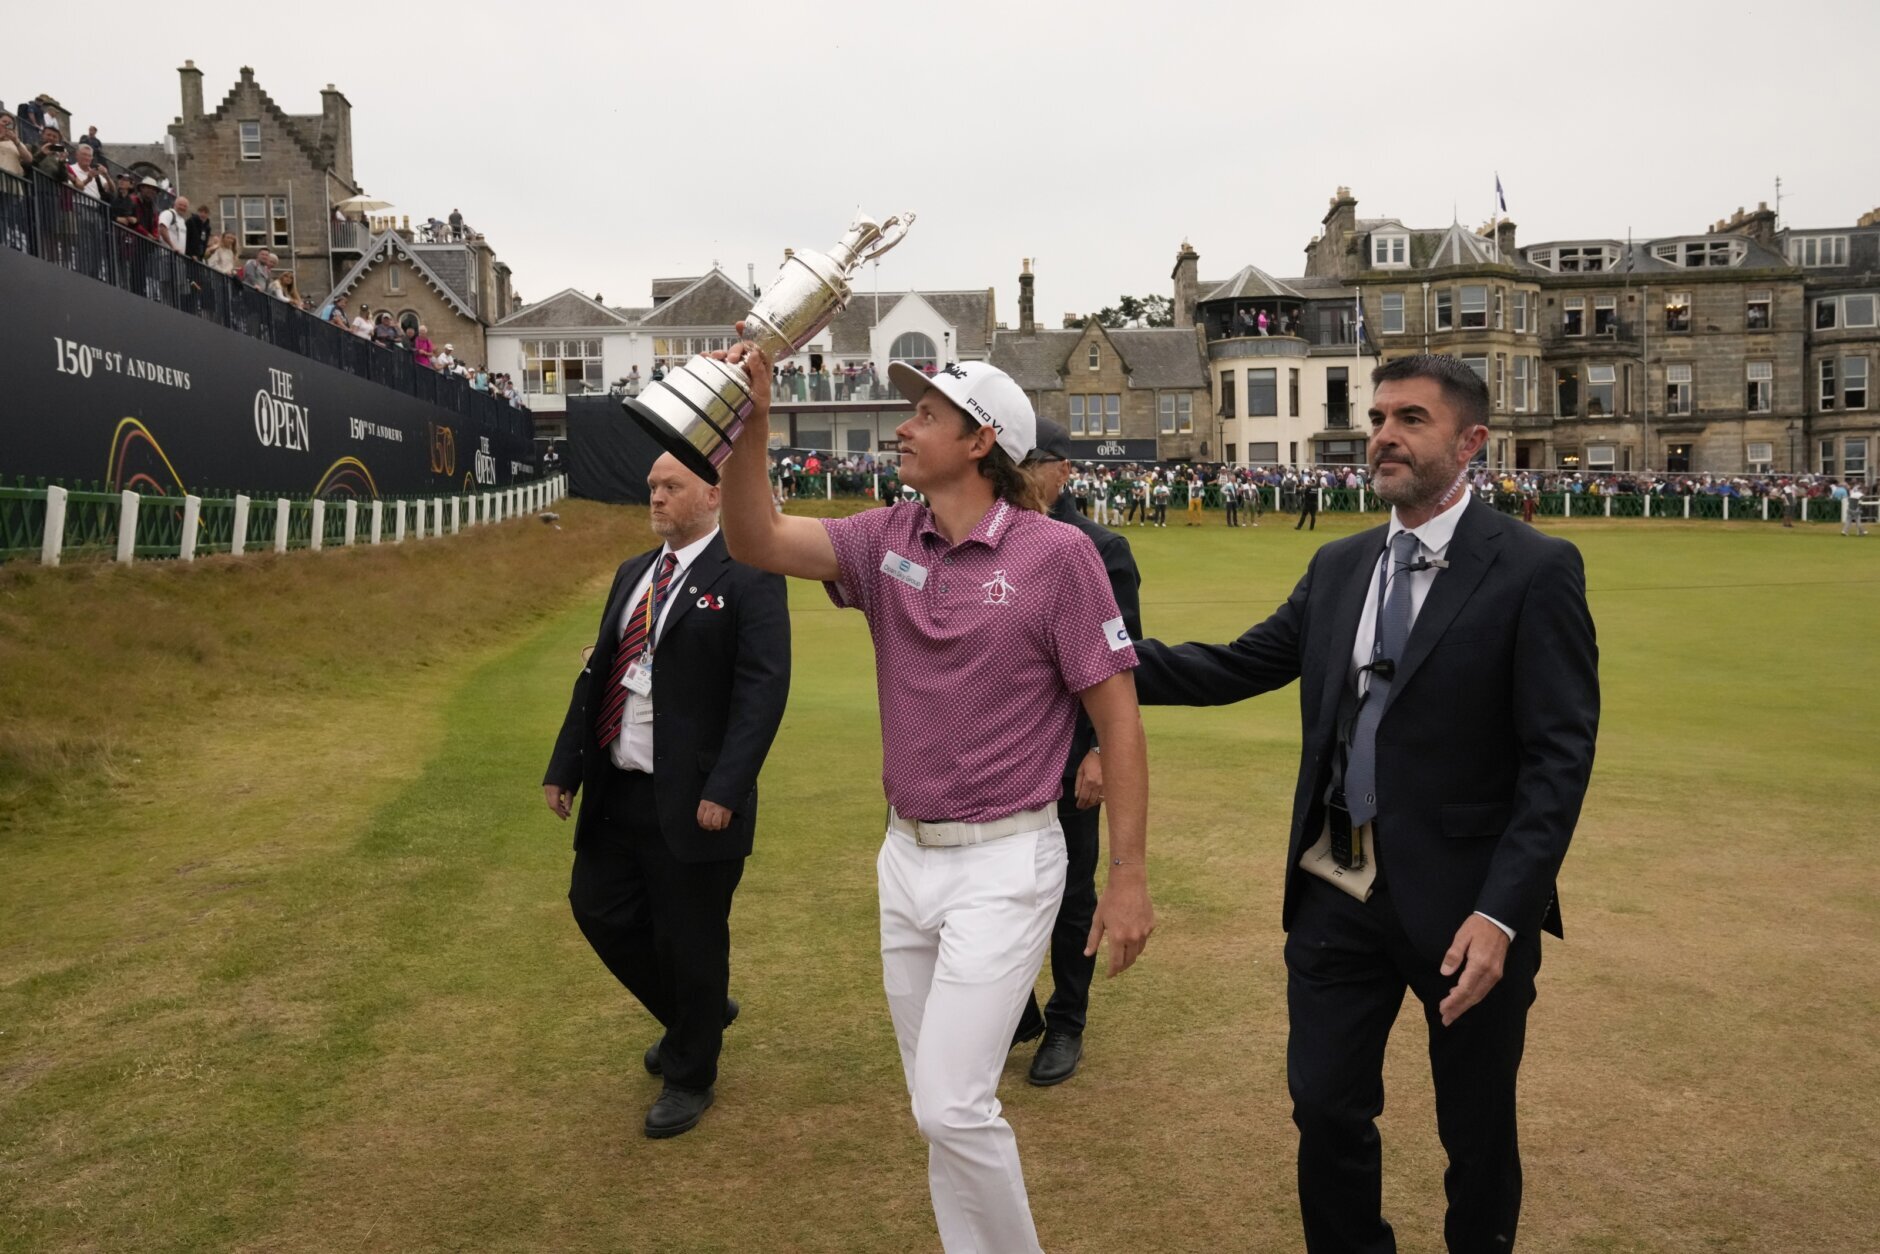 Cameron Smith, of Australia, holds the claret jug trophy after winning the British Open golf championship on the Old Course at St. Andrews, Scotland, Sunday July 17, 2022. (AP Photo/Gerald Herbert)